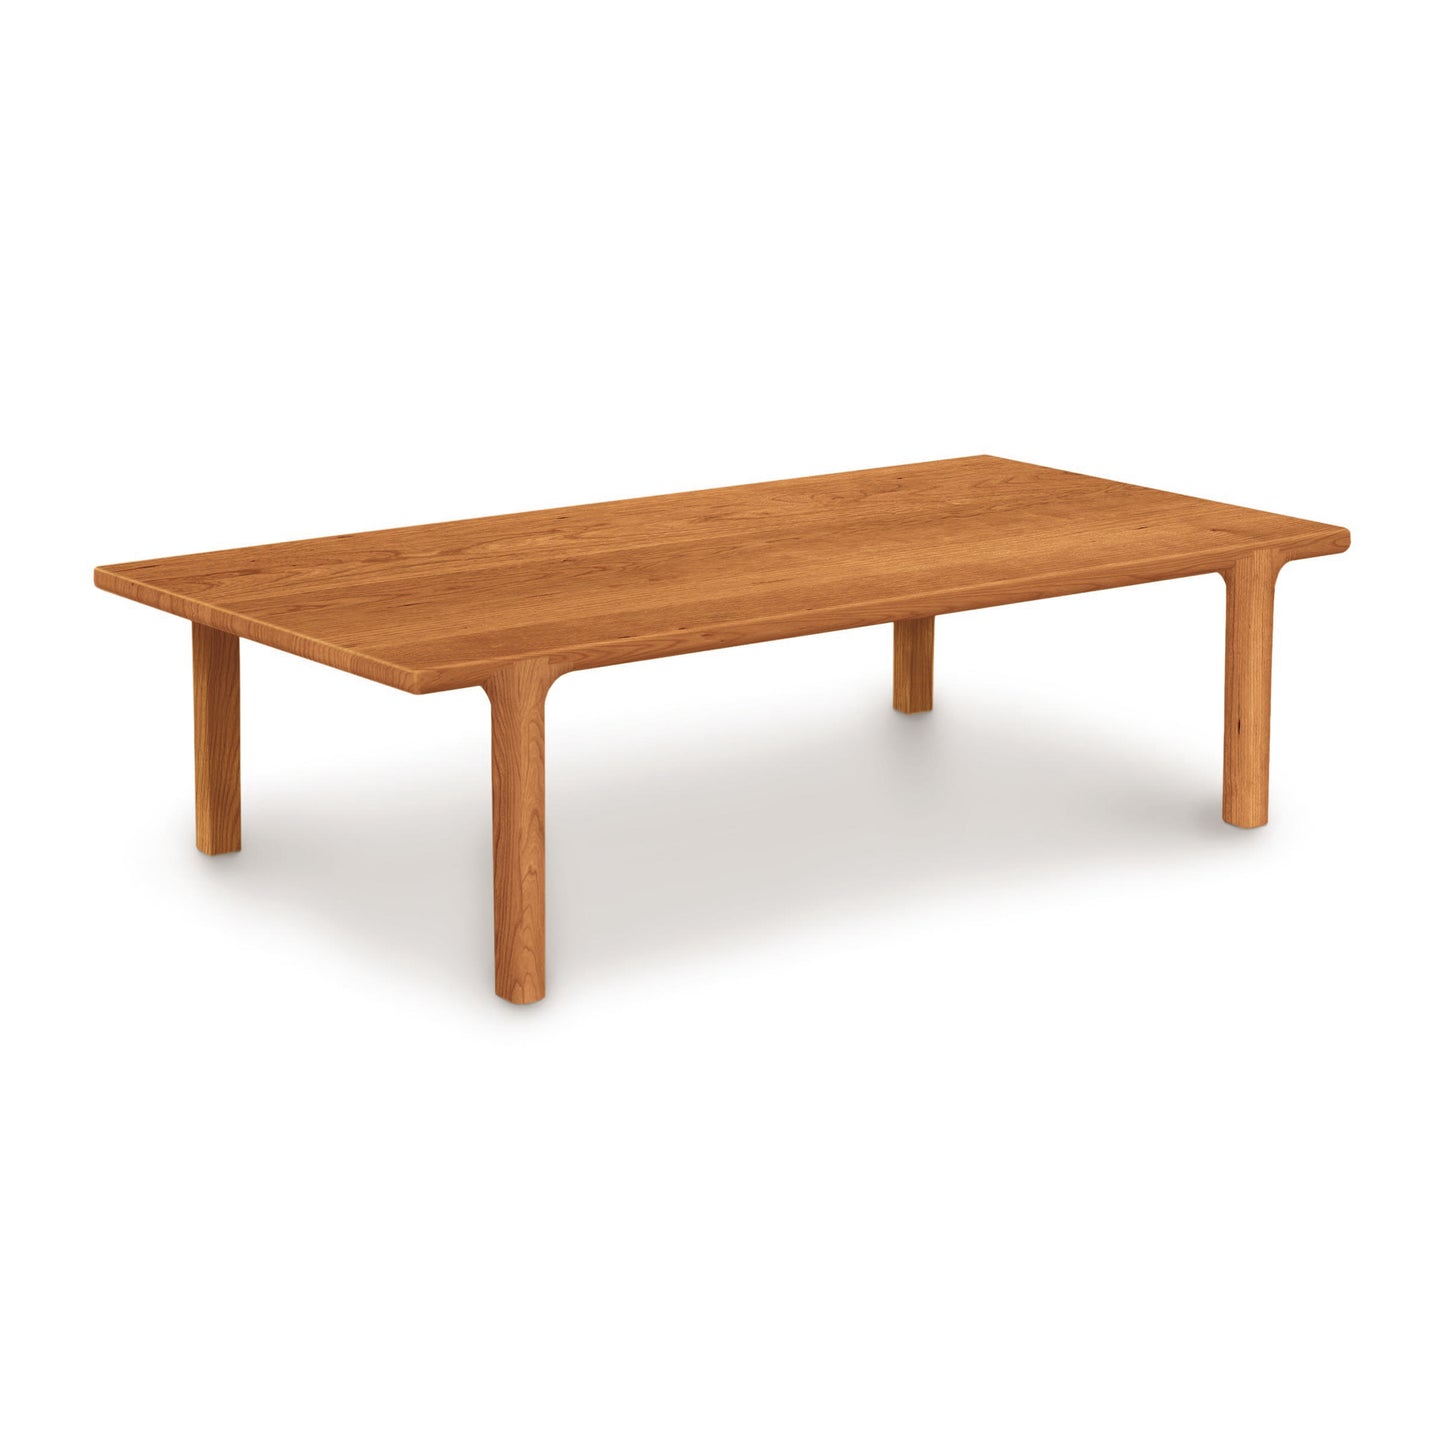 A solid North American hardwood Copeland Furniture Sierra Rectangular Coffee Table with four legs, isolated on a white background.